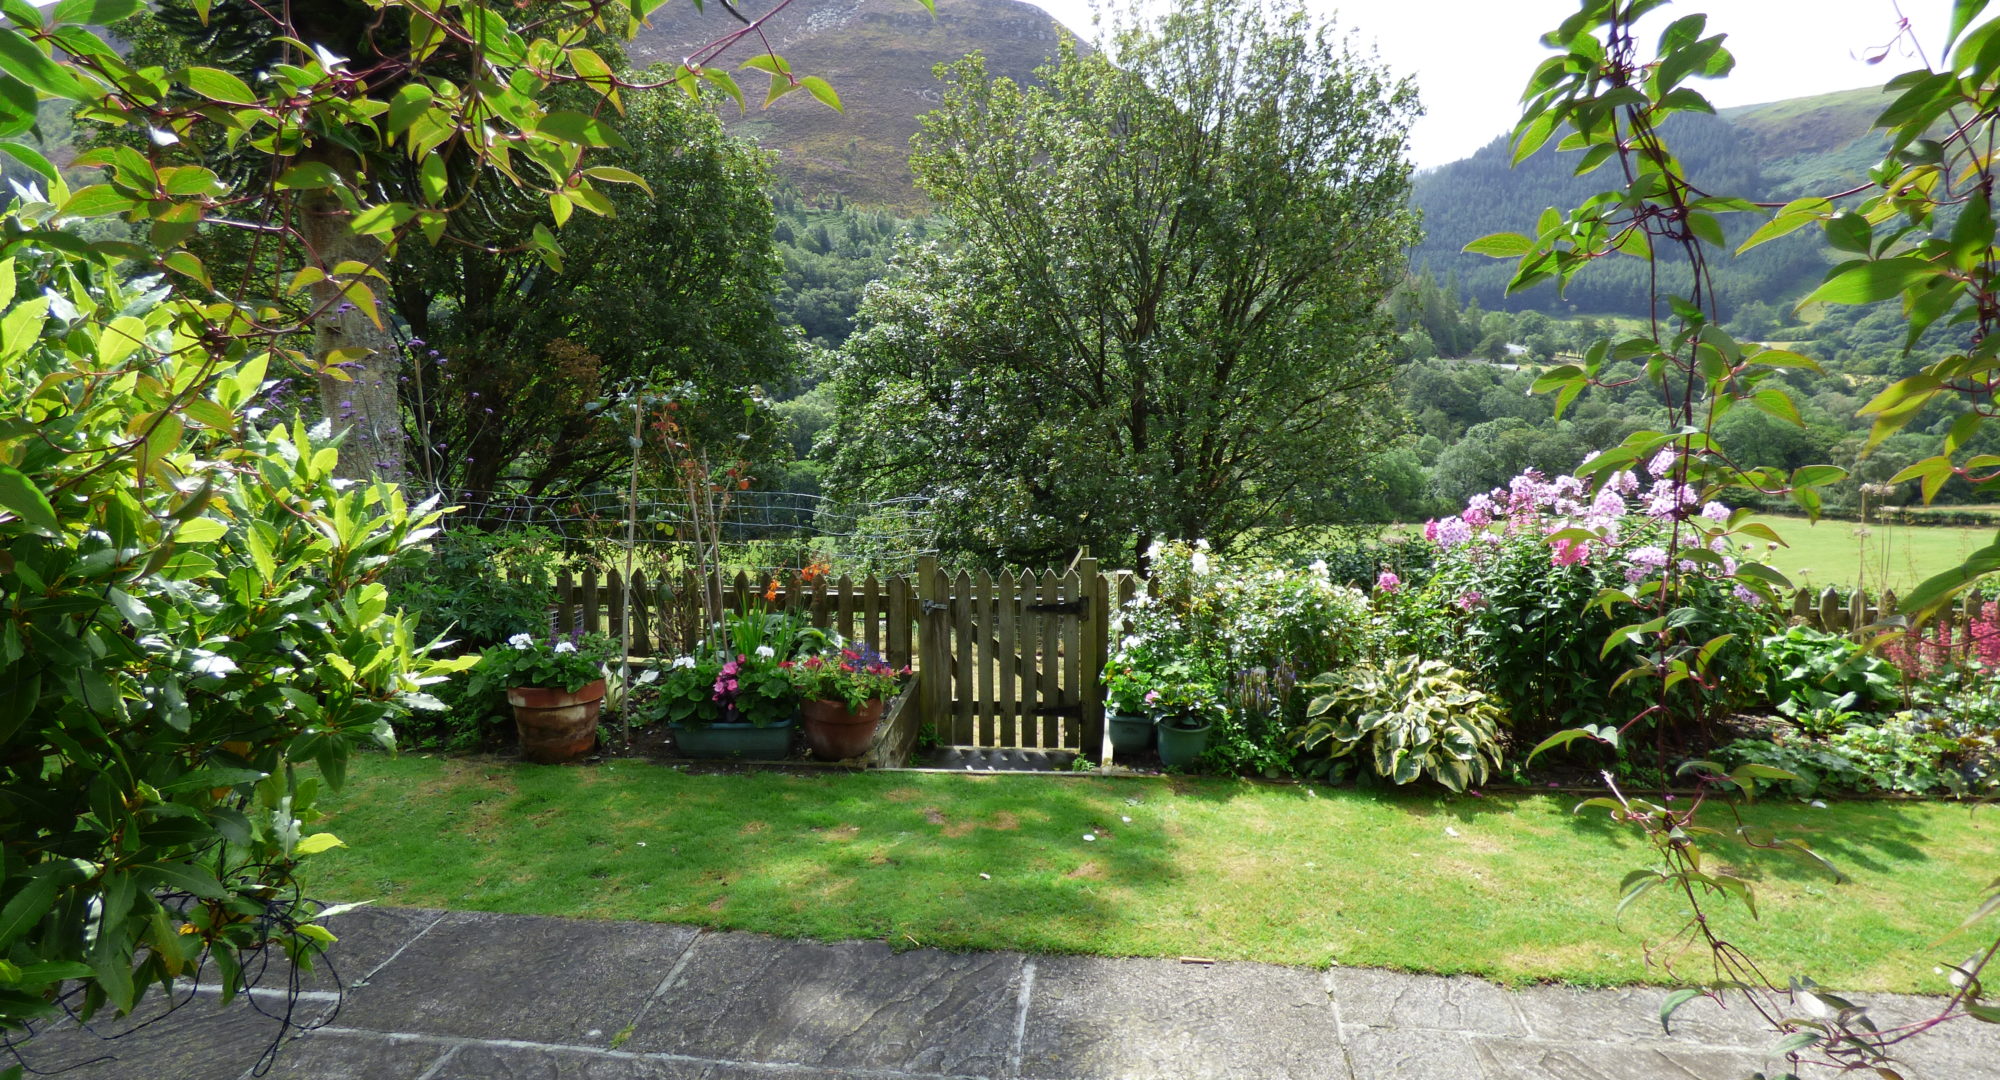 The back garden of a cottage with a hot tub, with flowers and picket fence